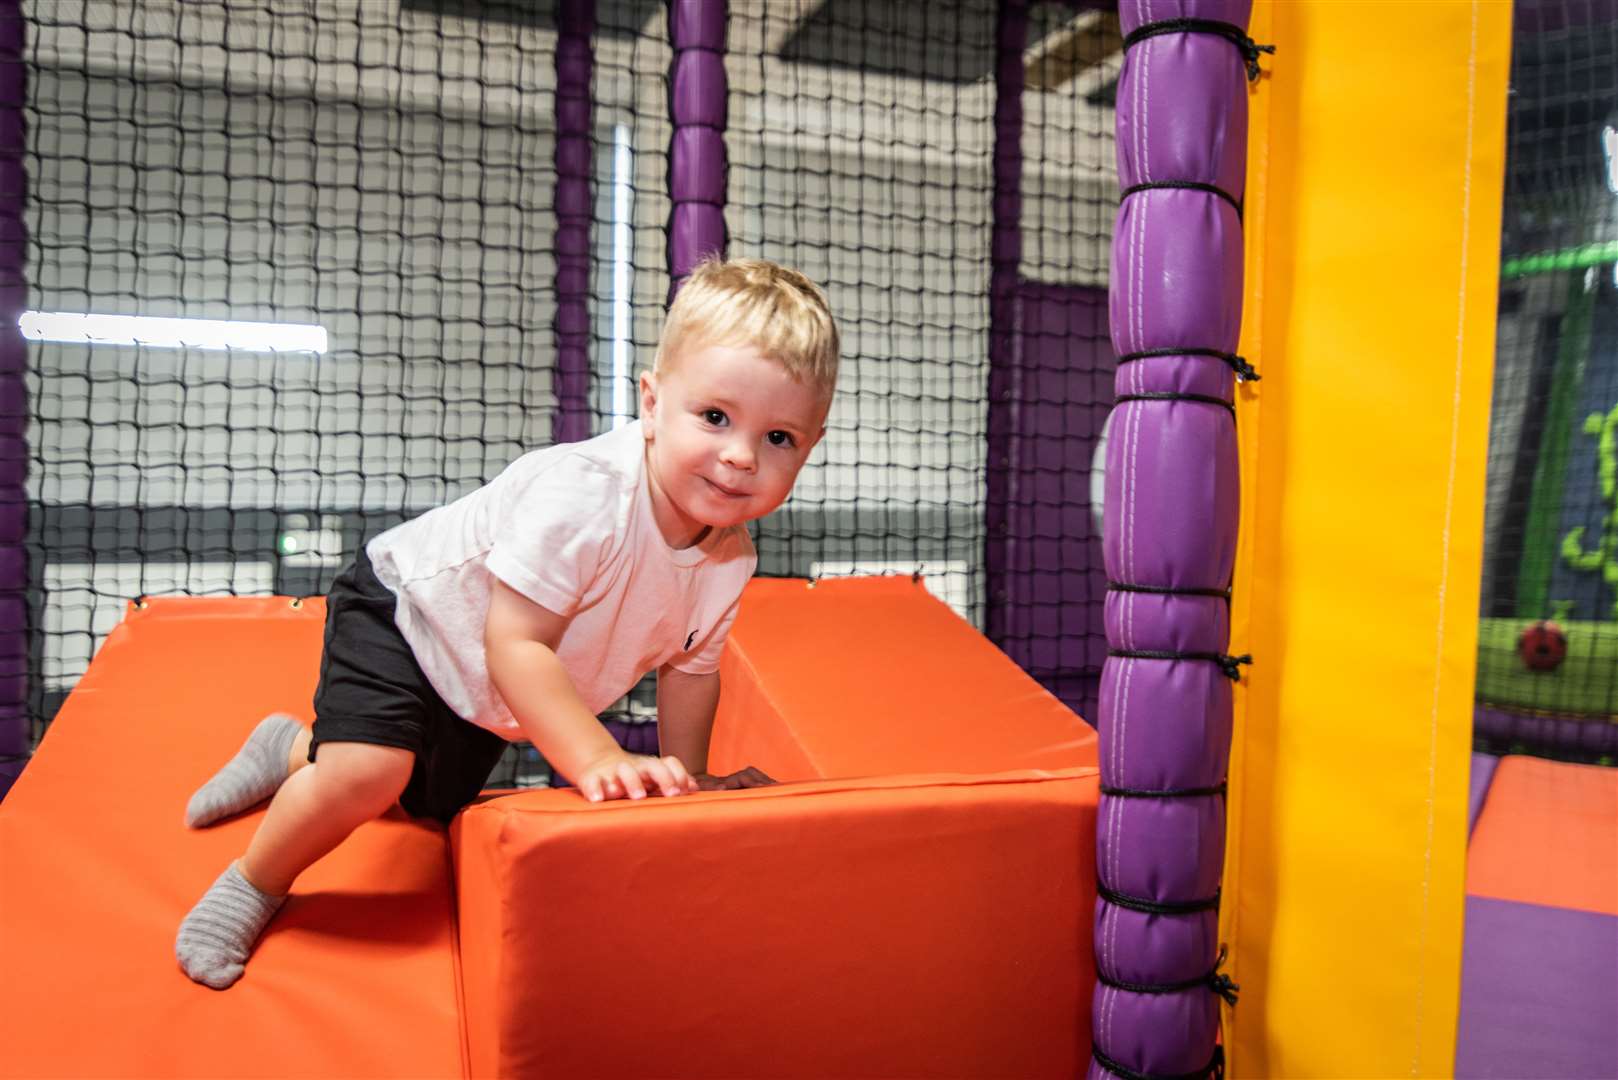 Take the kids to soft play to burn off some energy